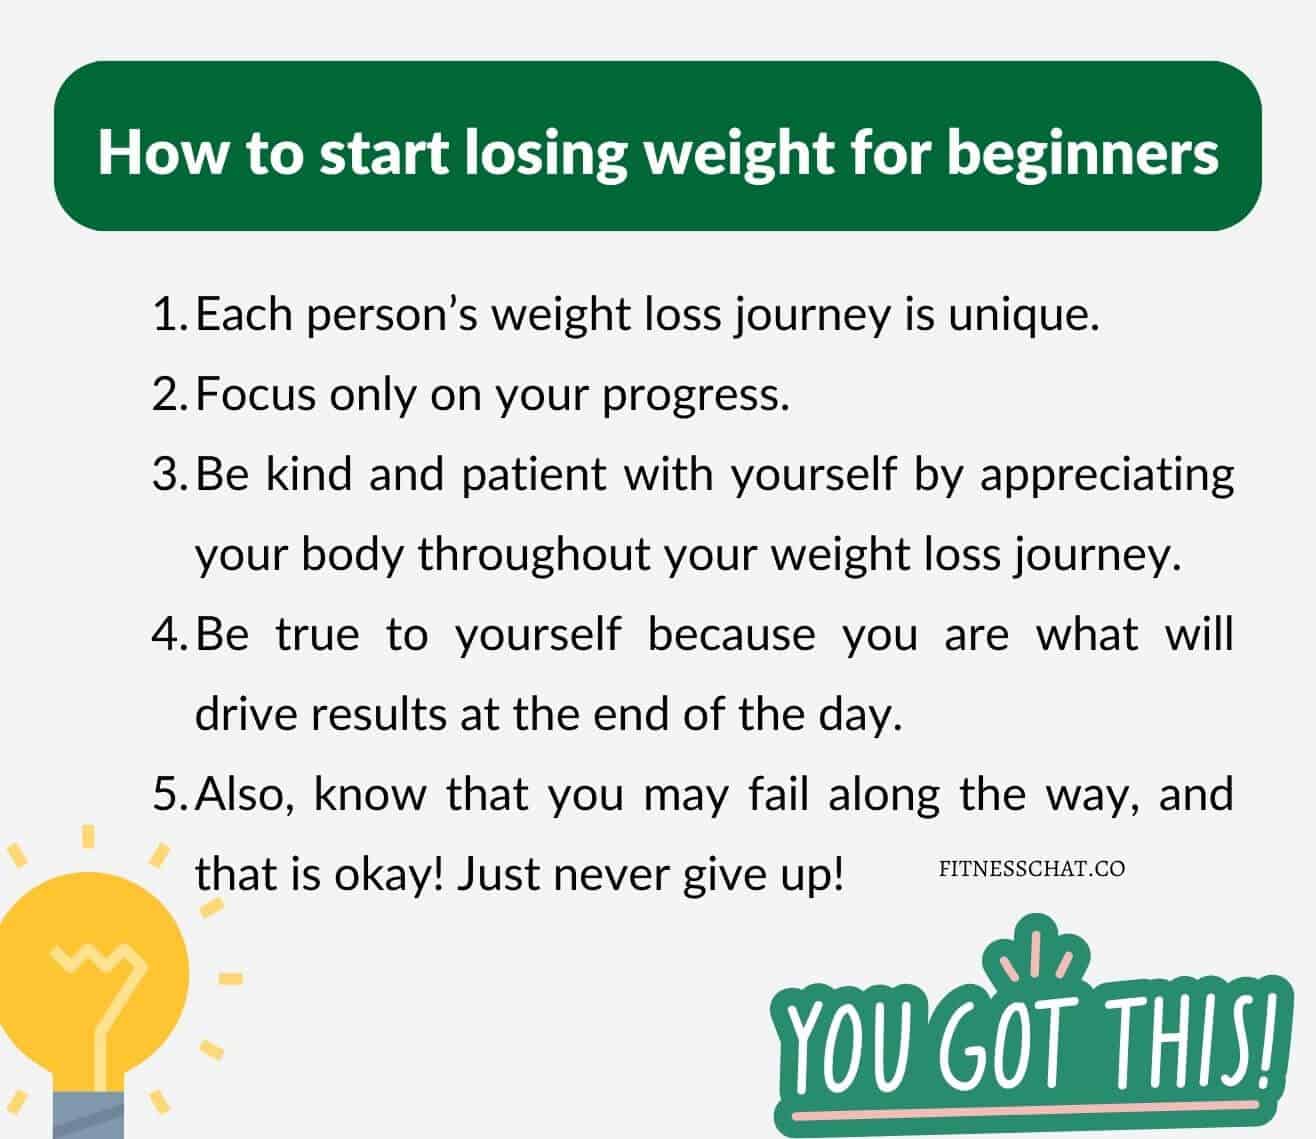 What is the best way to start losing weight for beginners